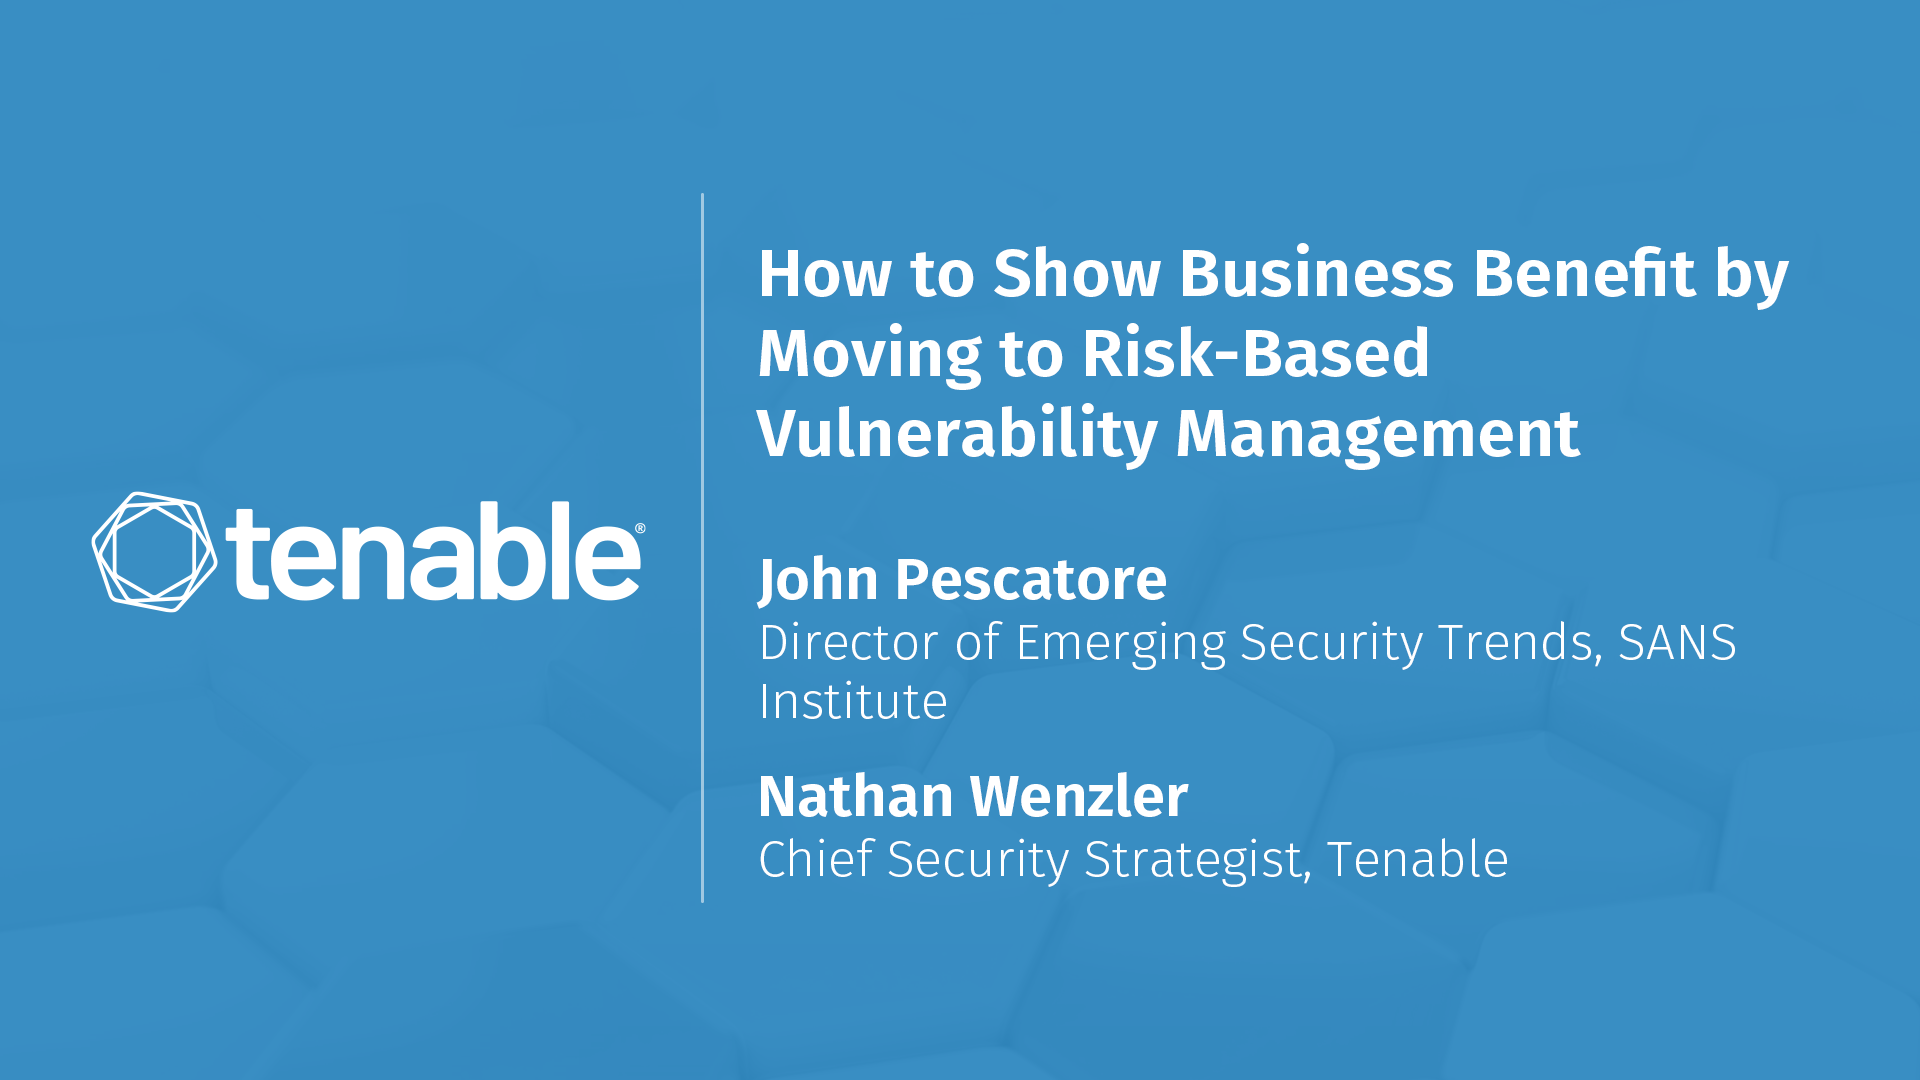 How to Show Business Benefit by Moving to Risk-Based Vulnerability Management